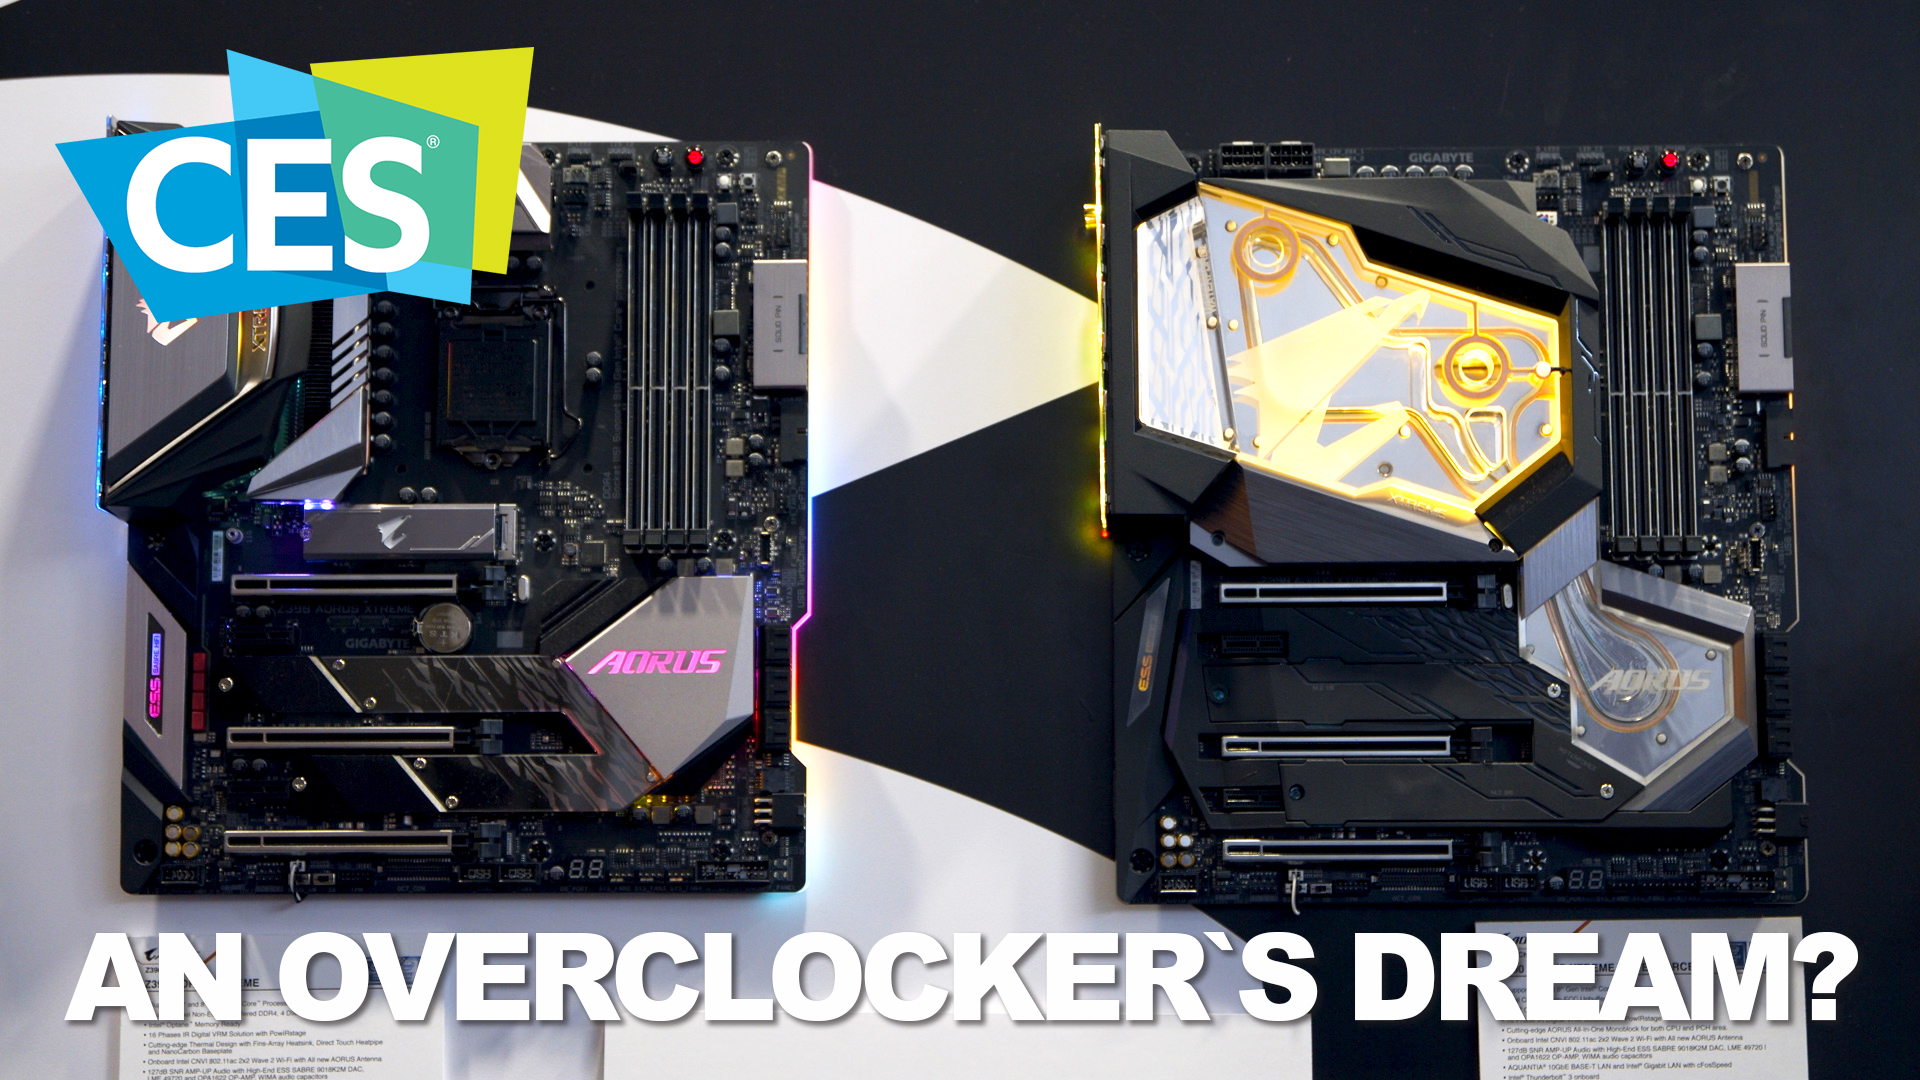 This Aorus z390 motherboard also comes with built in water blocks for super-cooled performance.